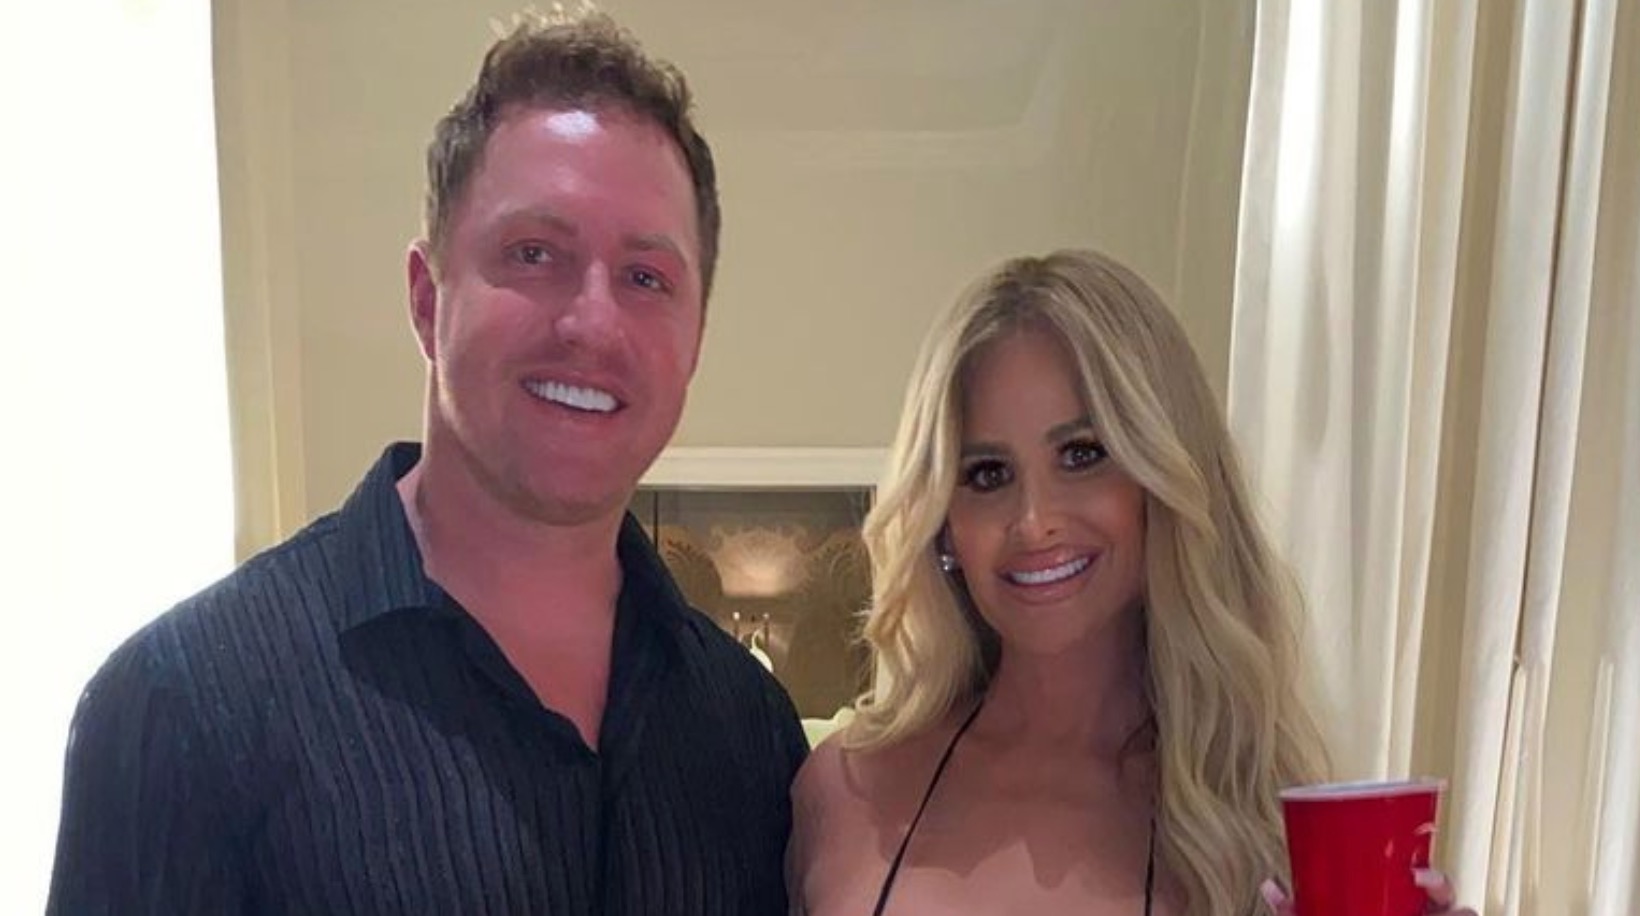 Kim Zolciak Biermann and Estranged Husband Kroy Biermann Make Shocking Decision Regarding Their Divorce | Two months after announcing their decision to divorce and filing papers to make it official, reality stars Kim Zolciak and Kroy Biermann have had a change of heart, it seems.